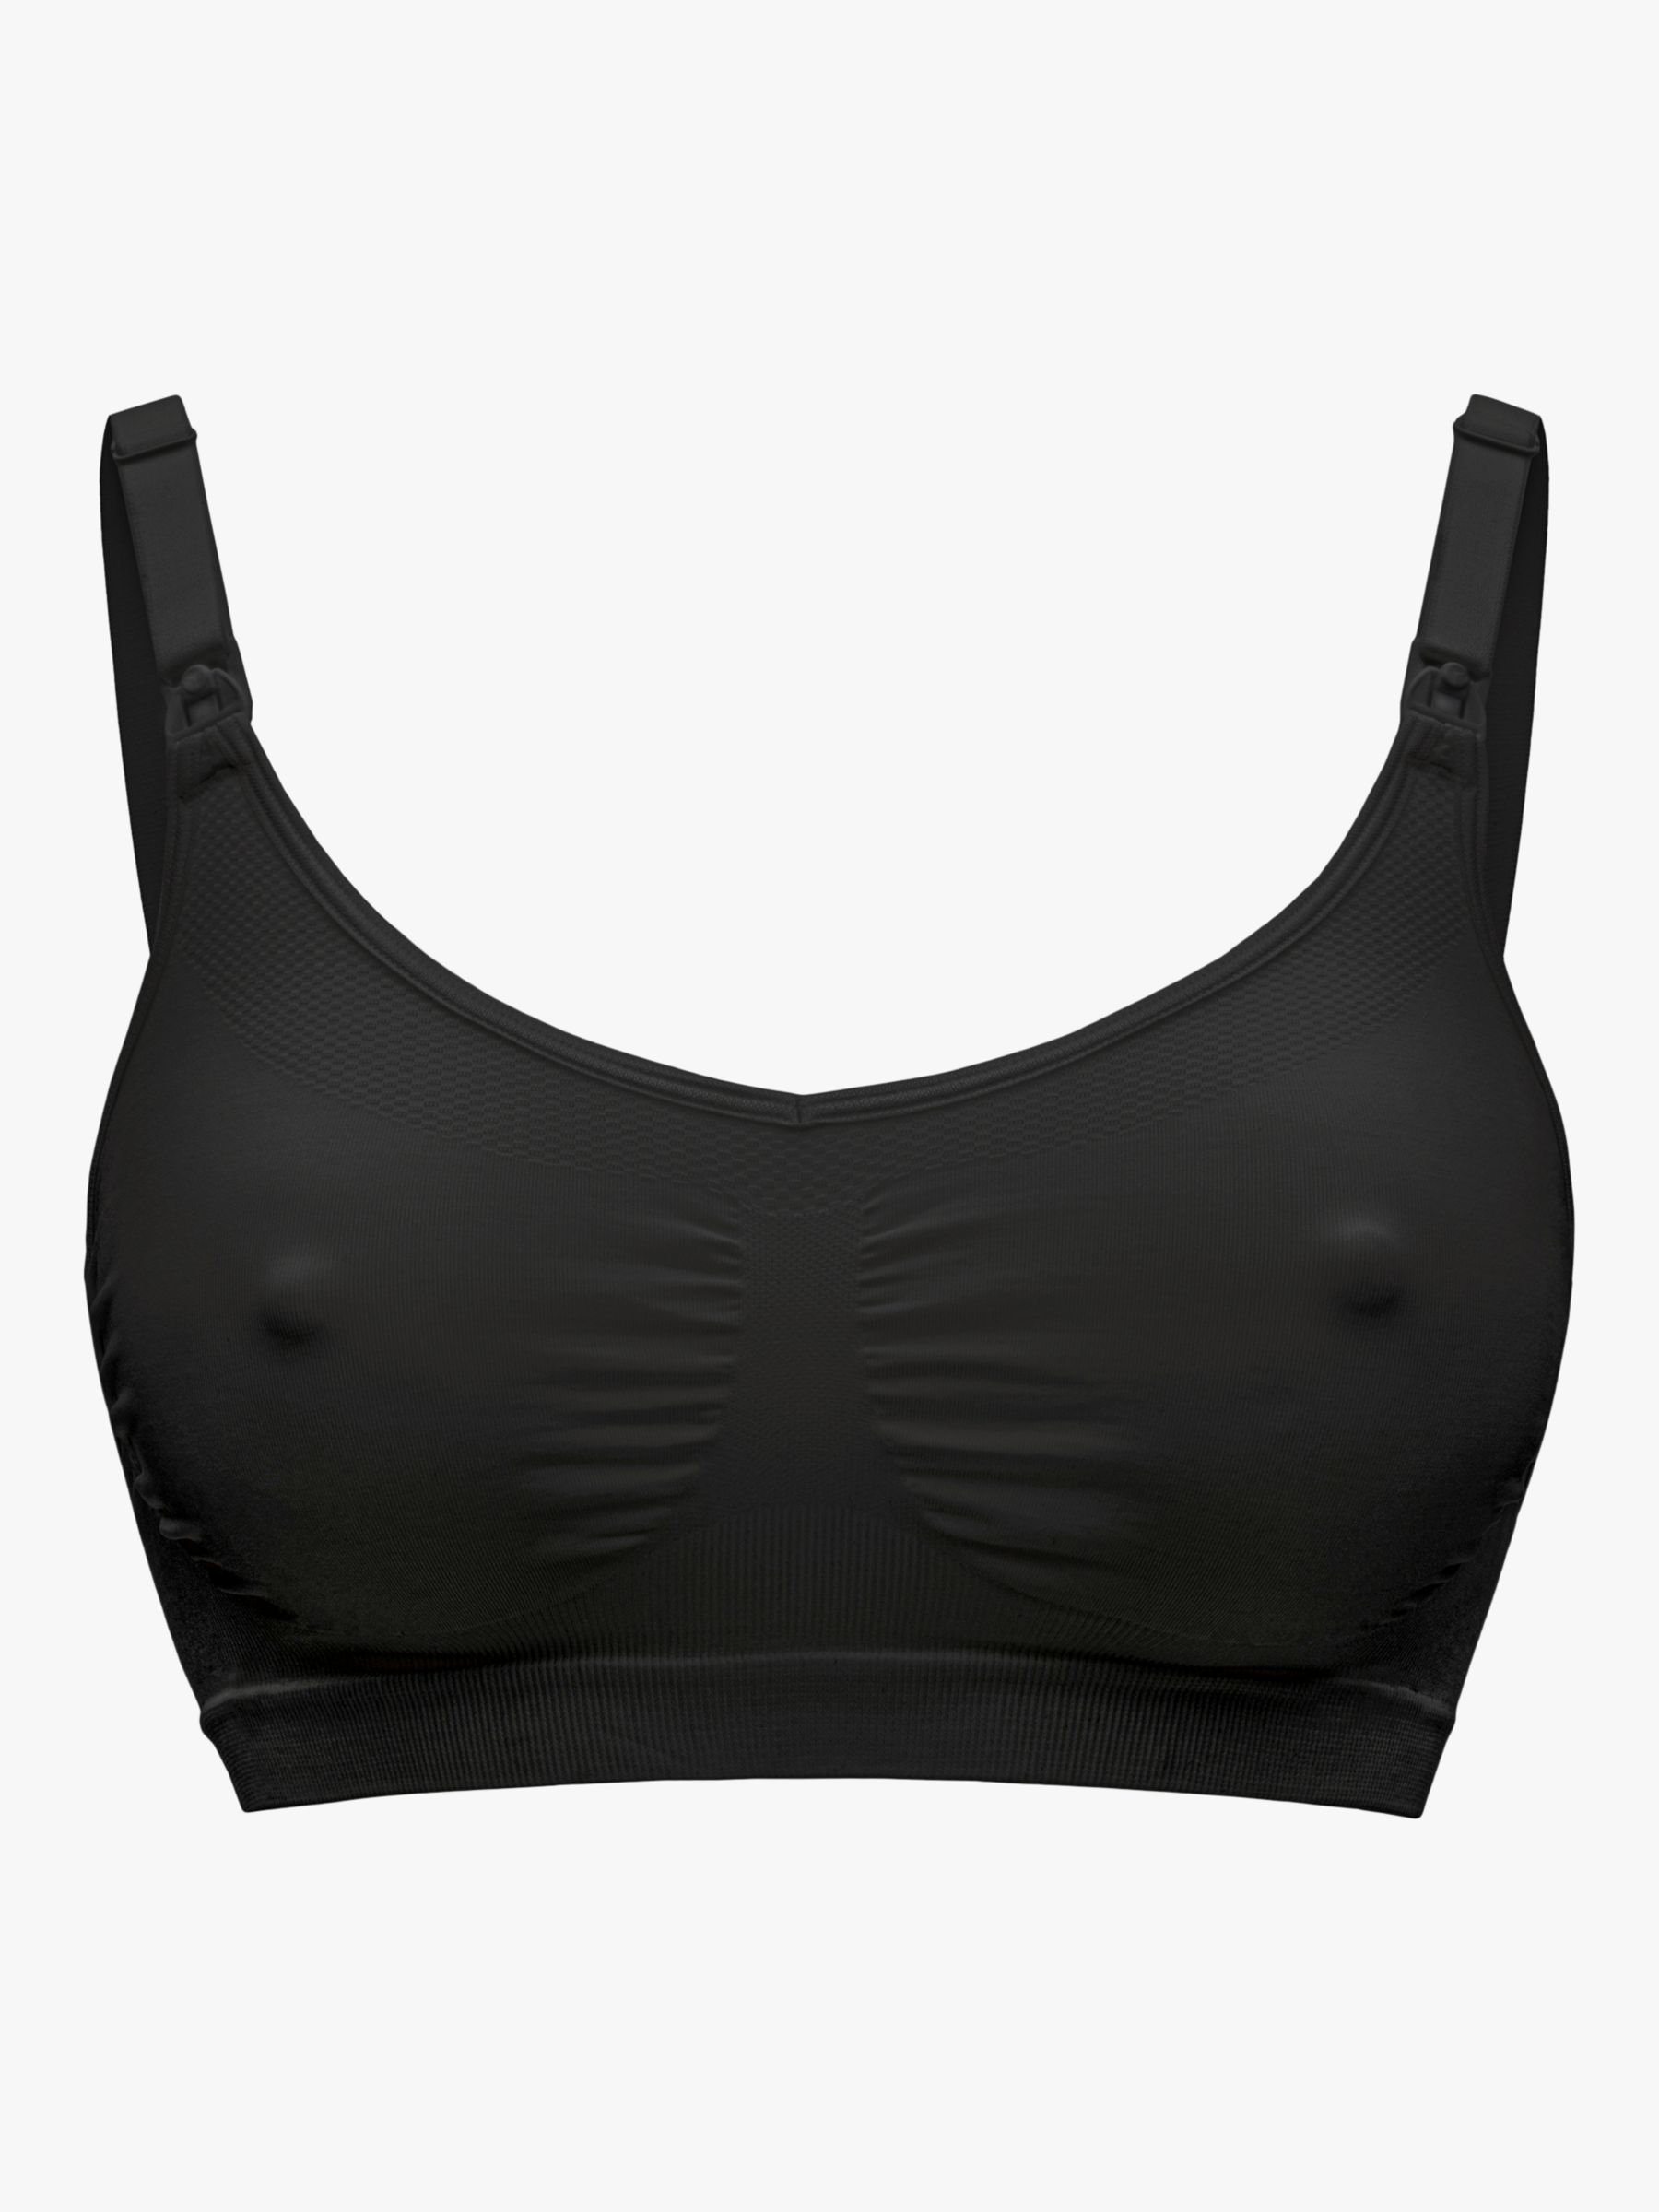 Modibodi - Our Breastfeeding Bra combines great shape with